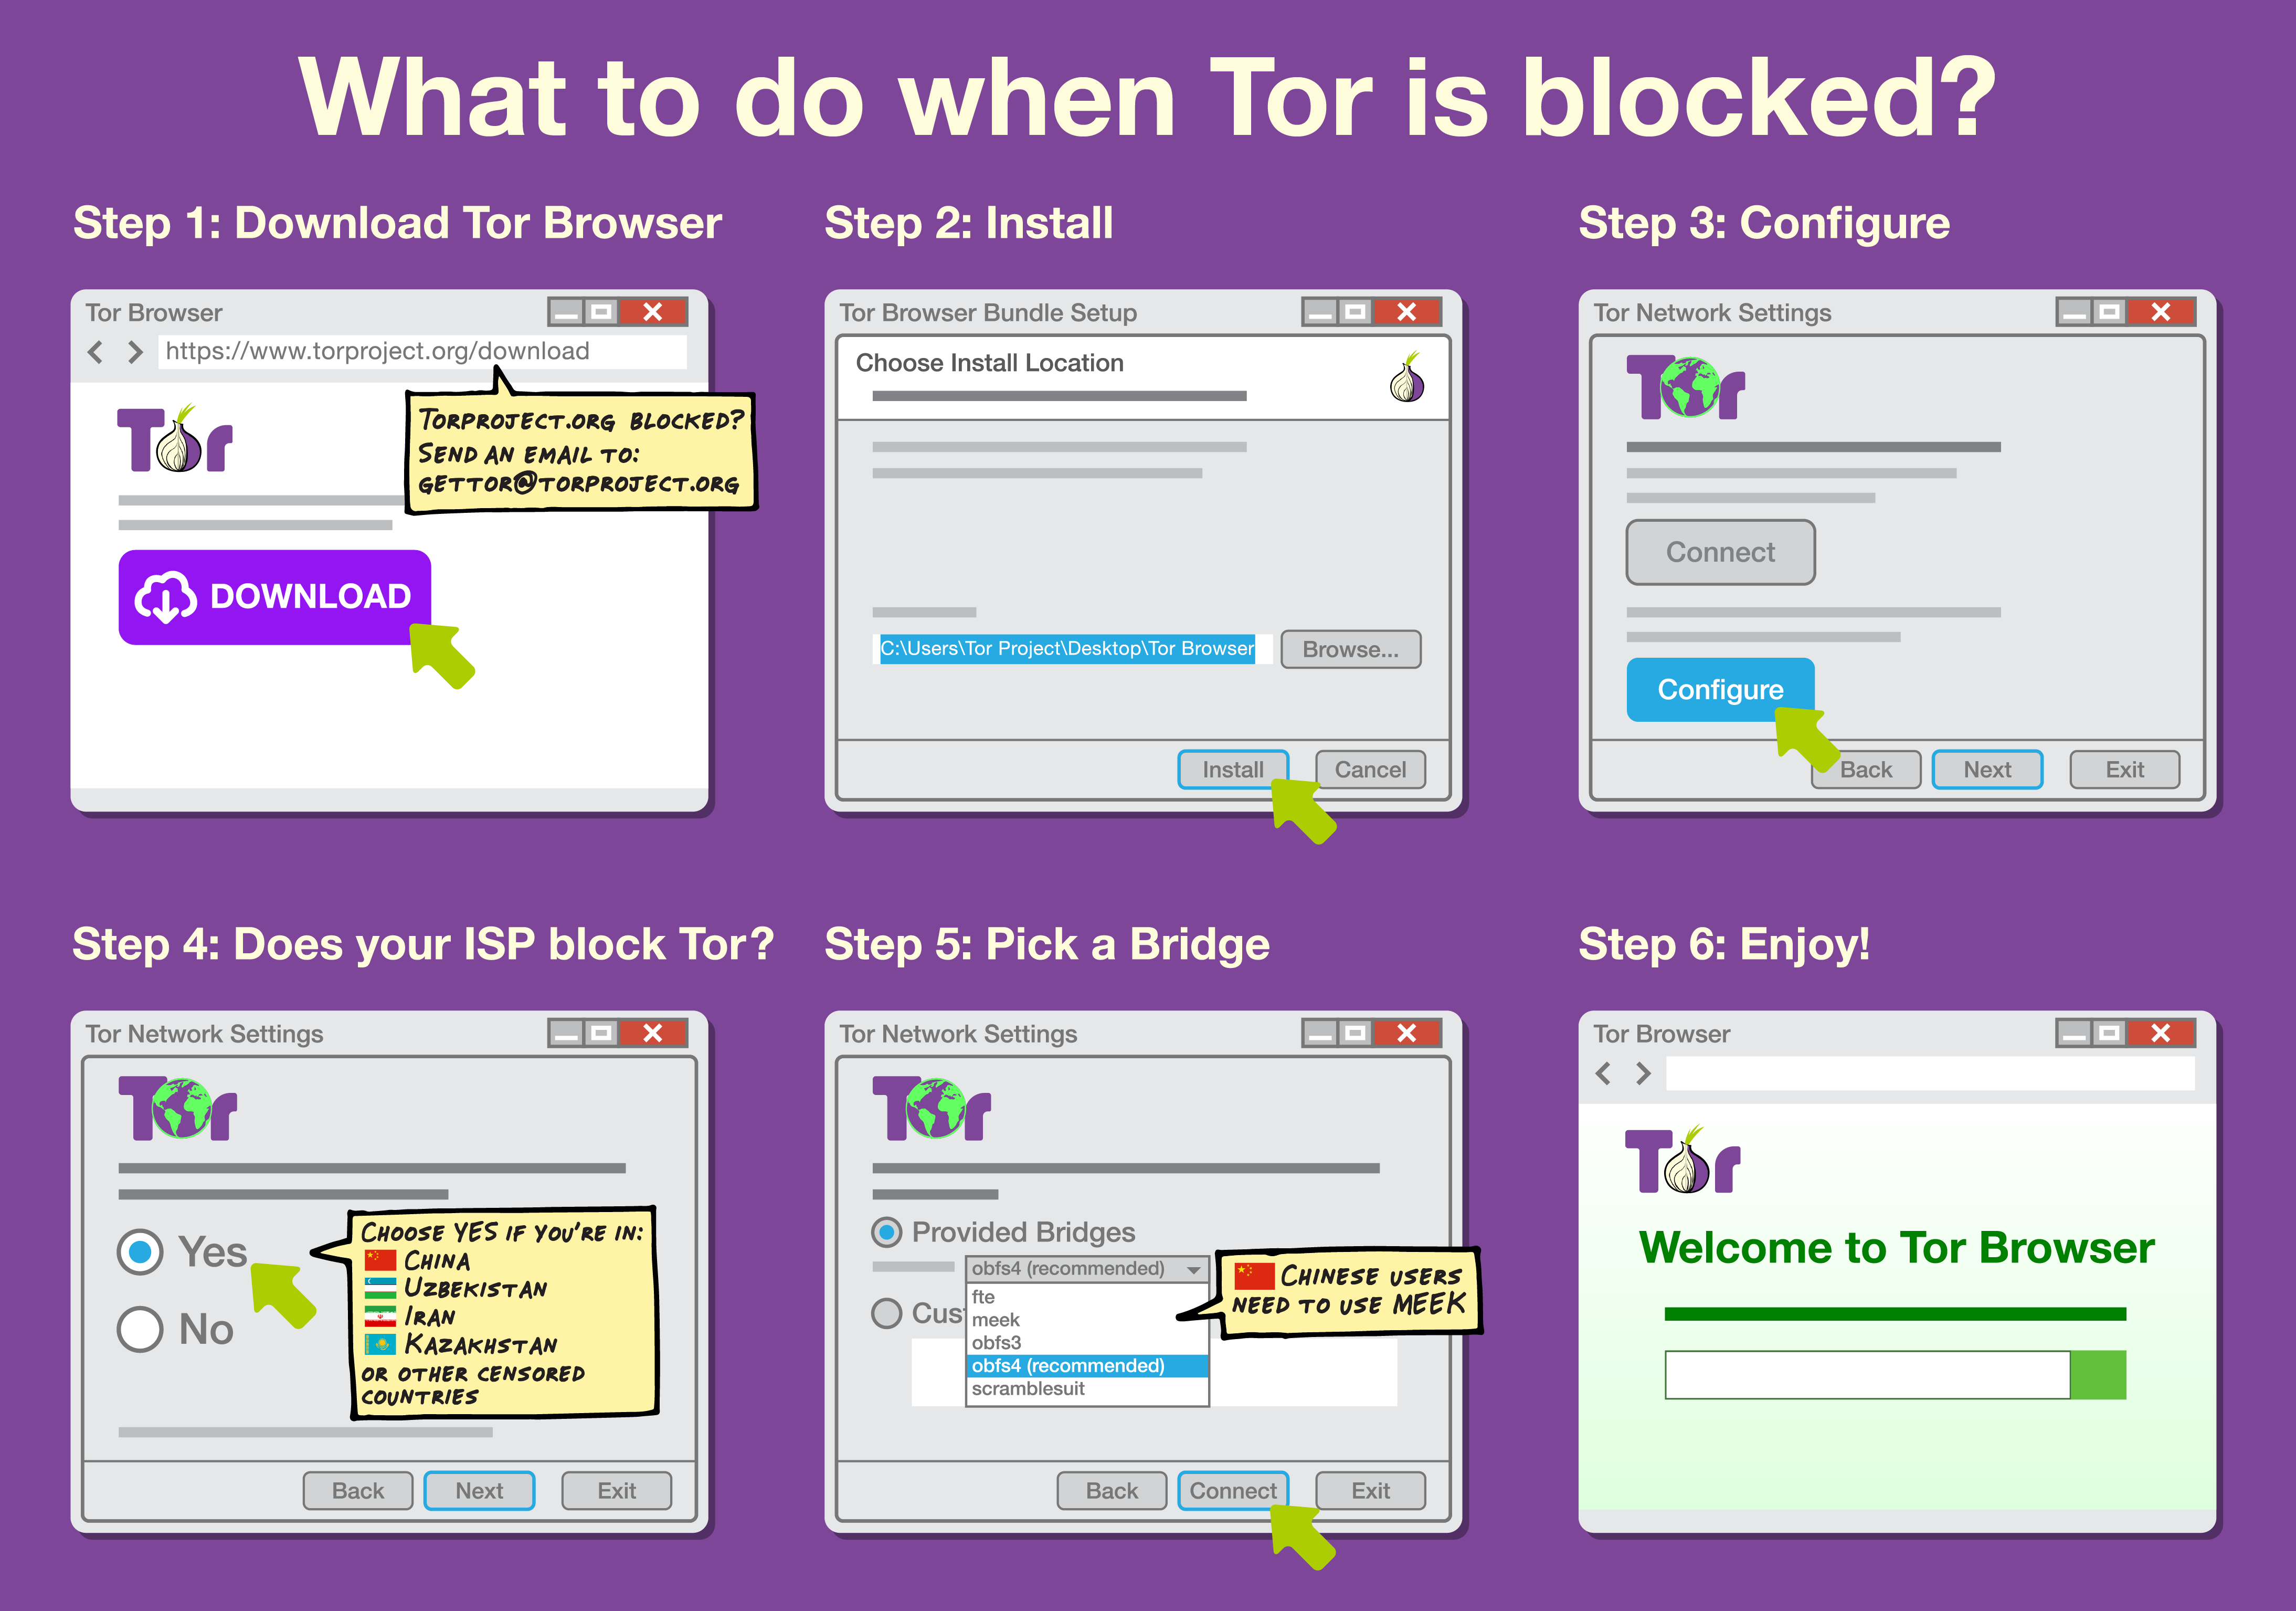 Can you get in trouble for using Tor?